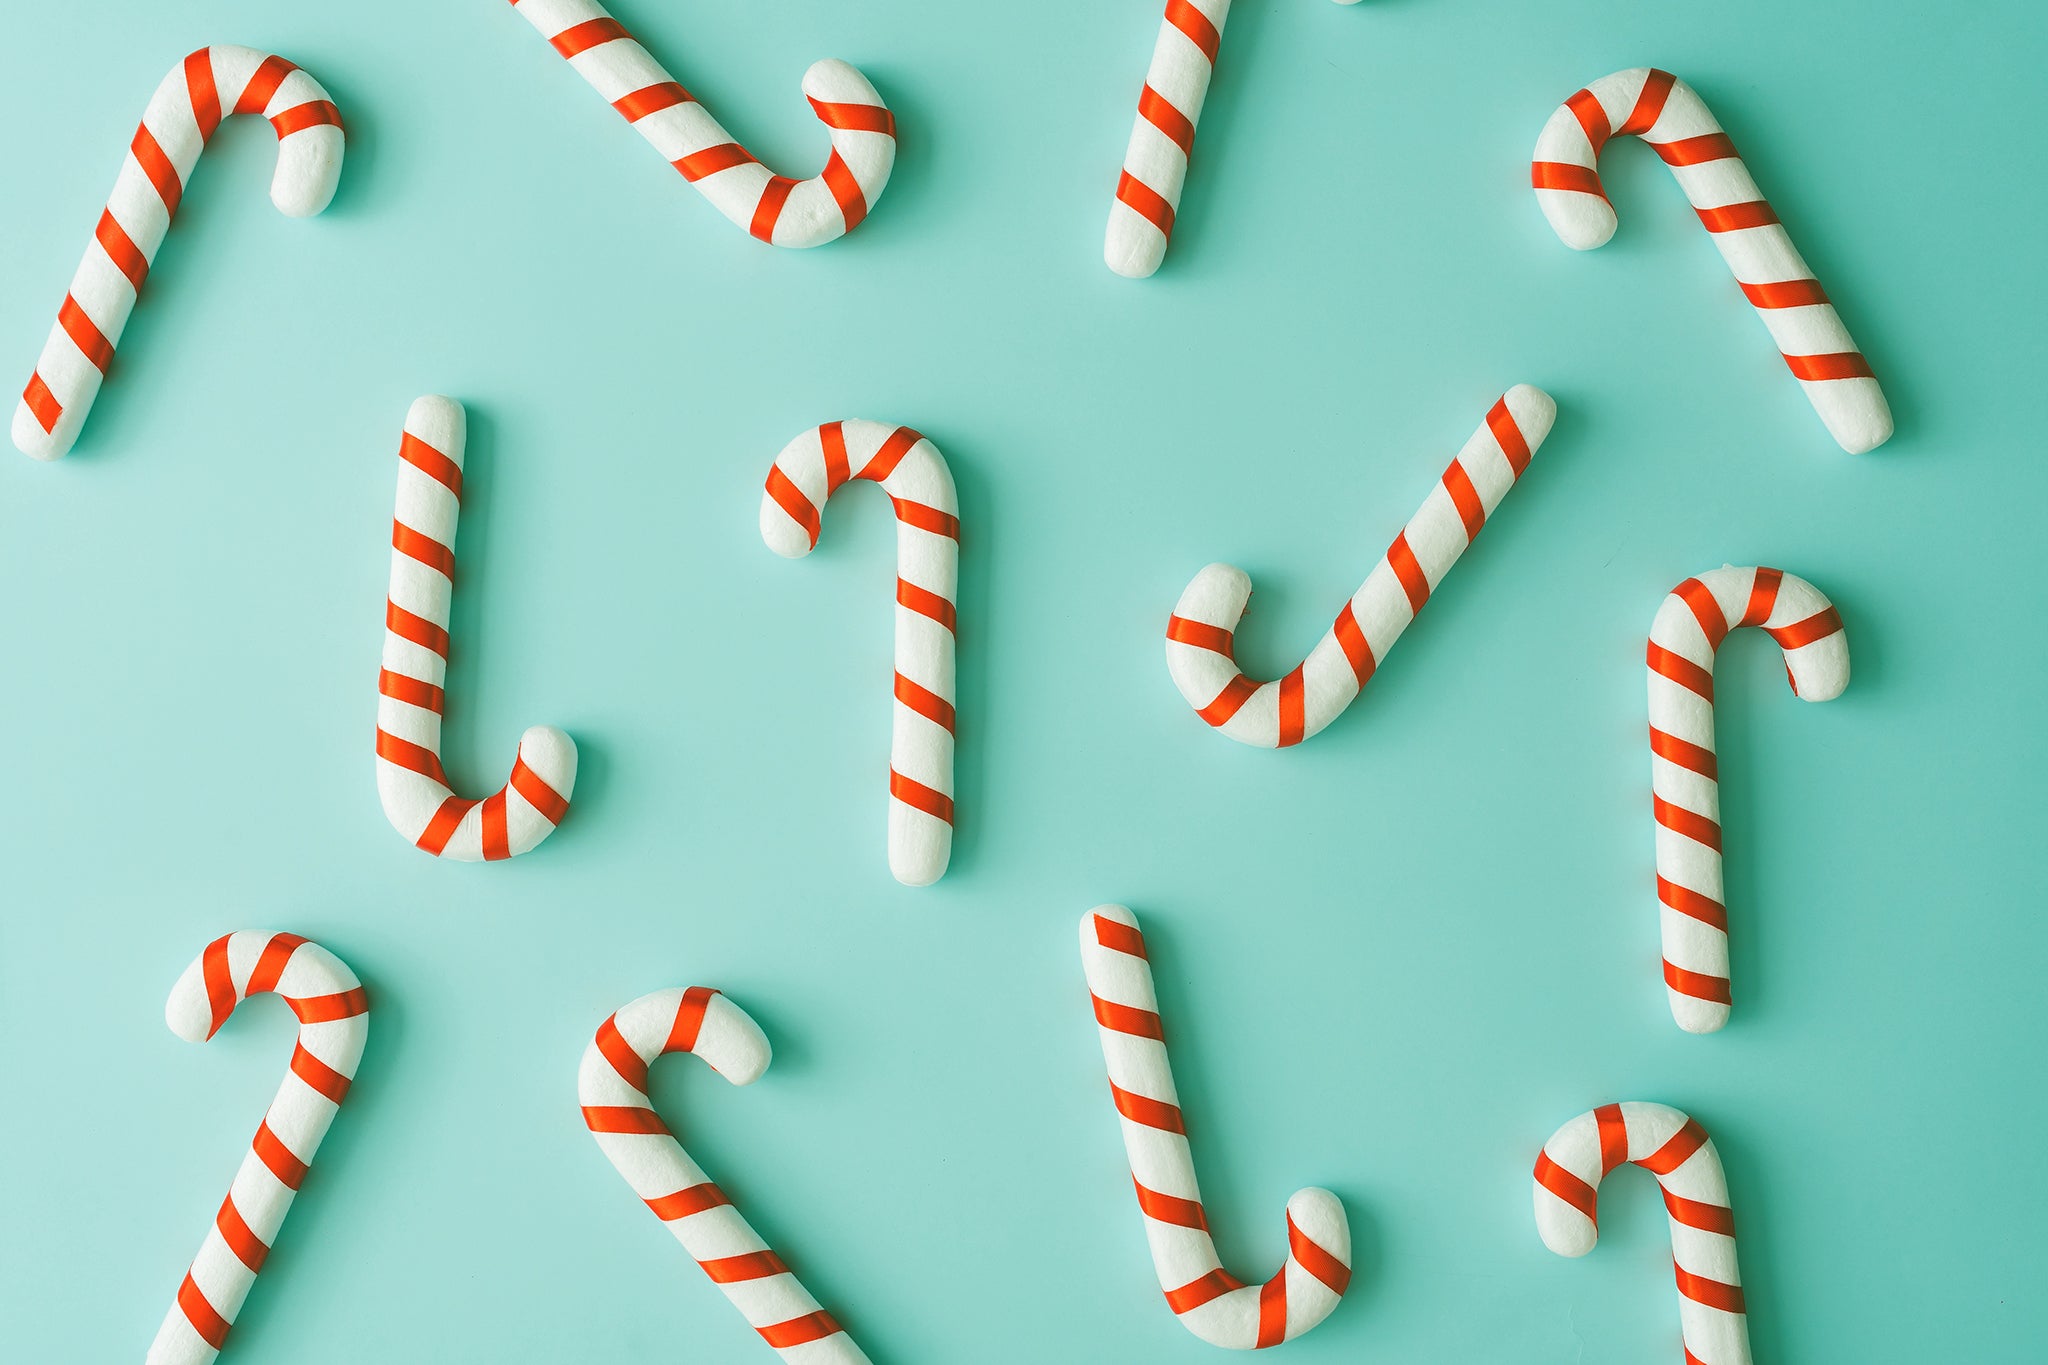 Pattern made with candy canes